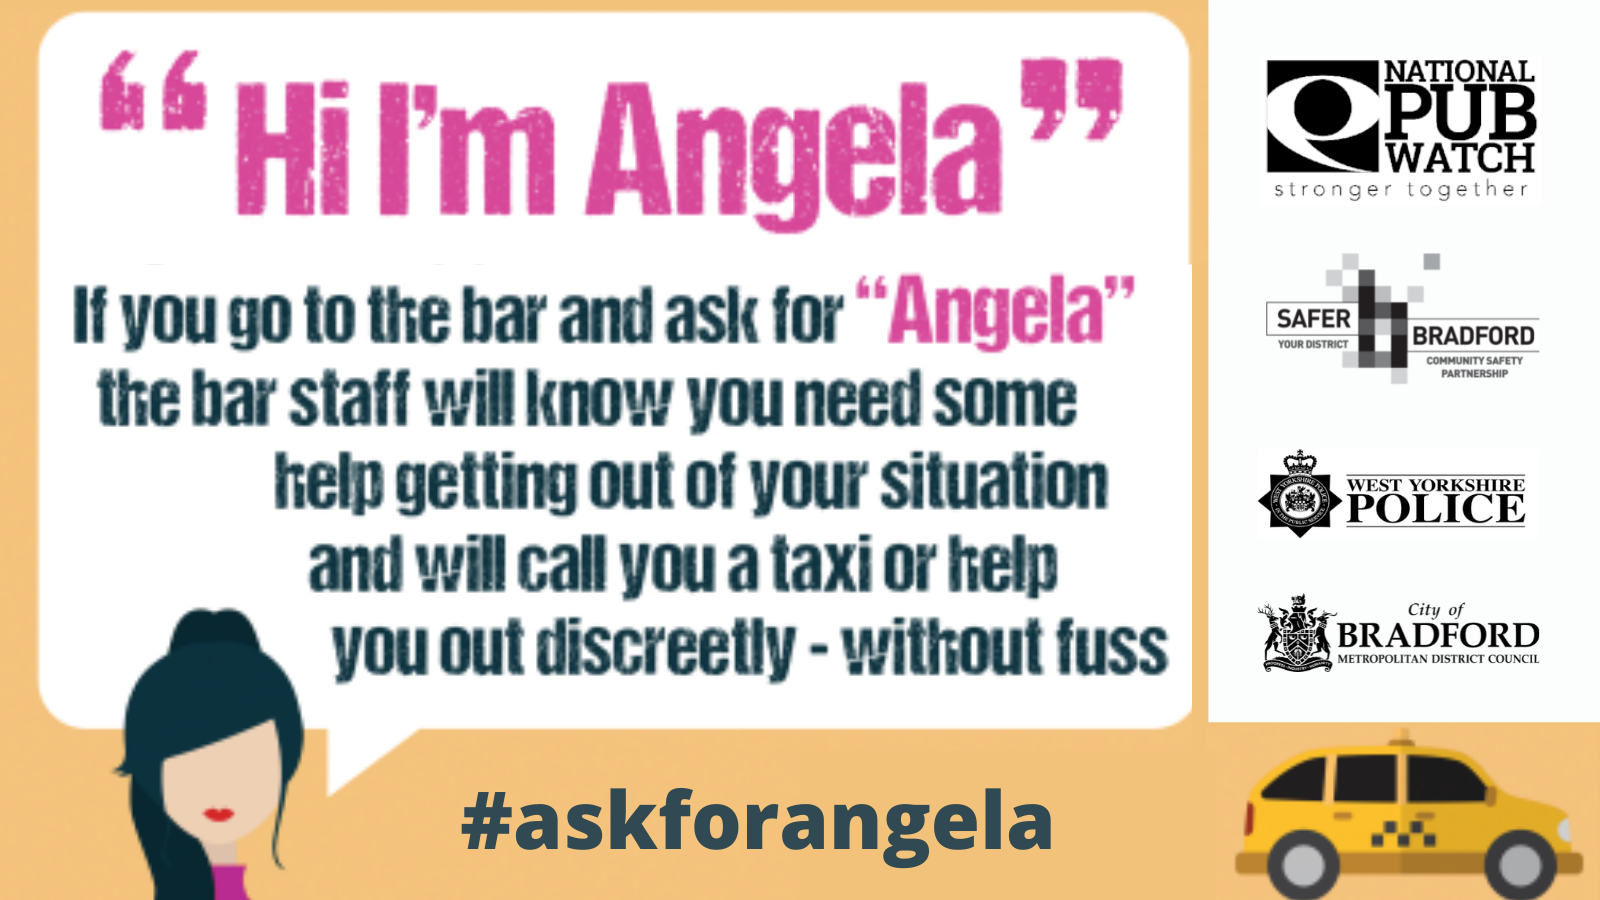 Hi I'm Angela. If you go to the bar and ask for Angela the bar staff will know you need some help getting out of your situation and will call you a taxi or help you out discreetly - without fuss.